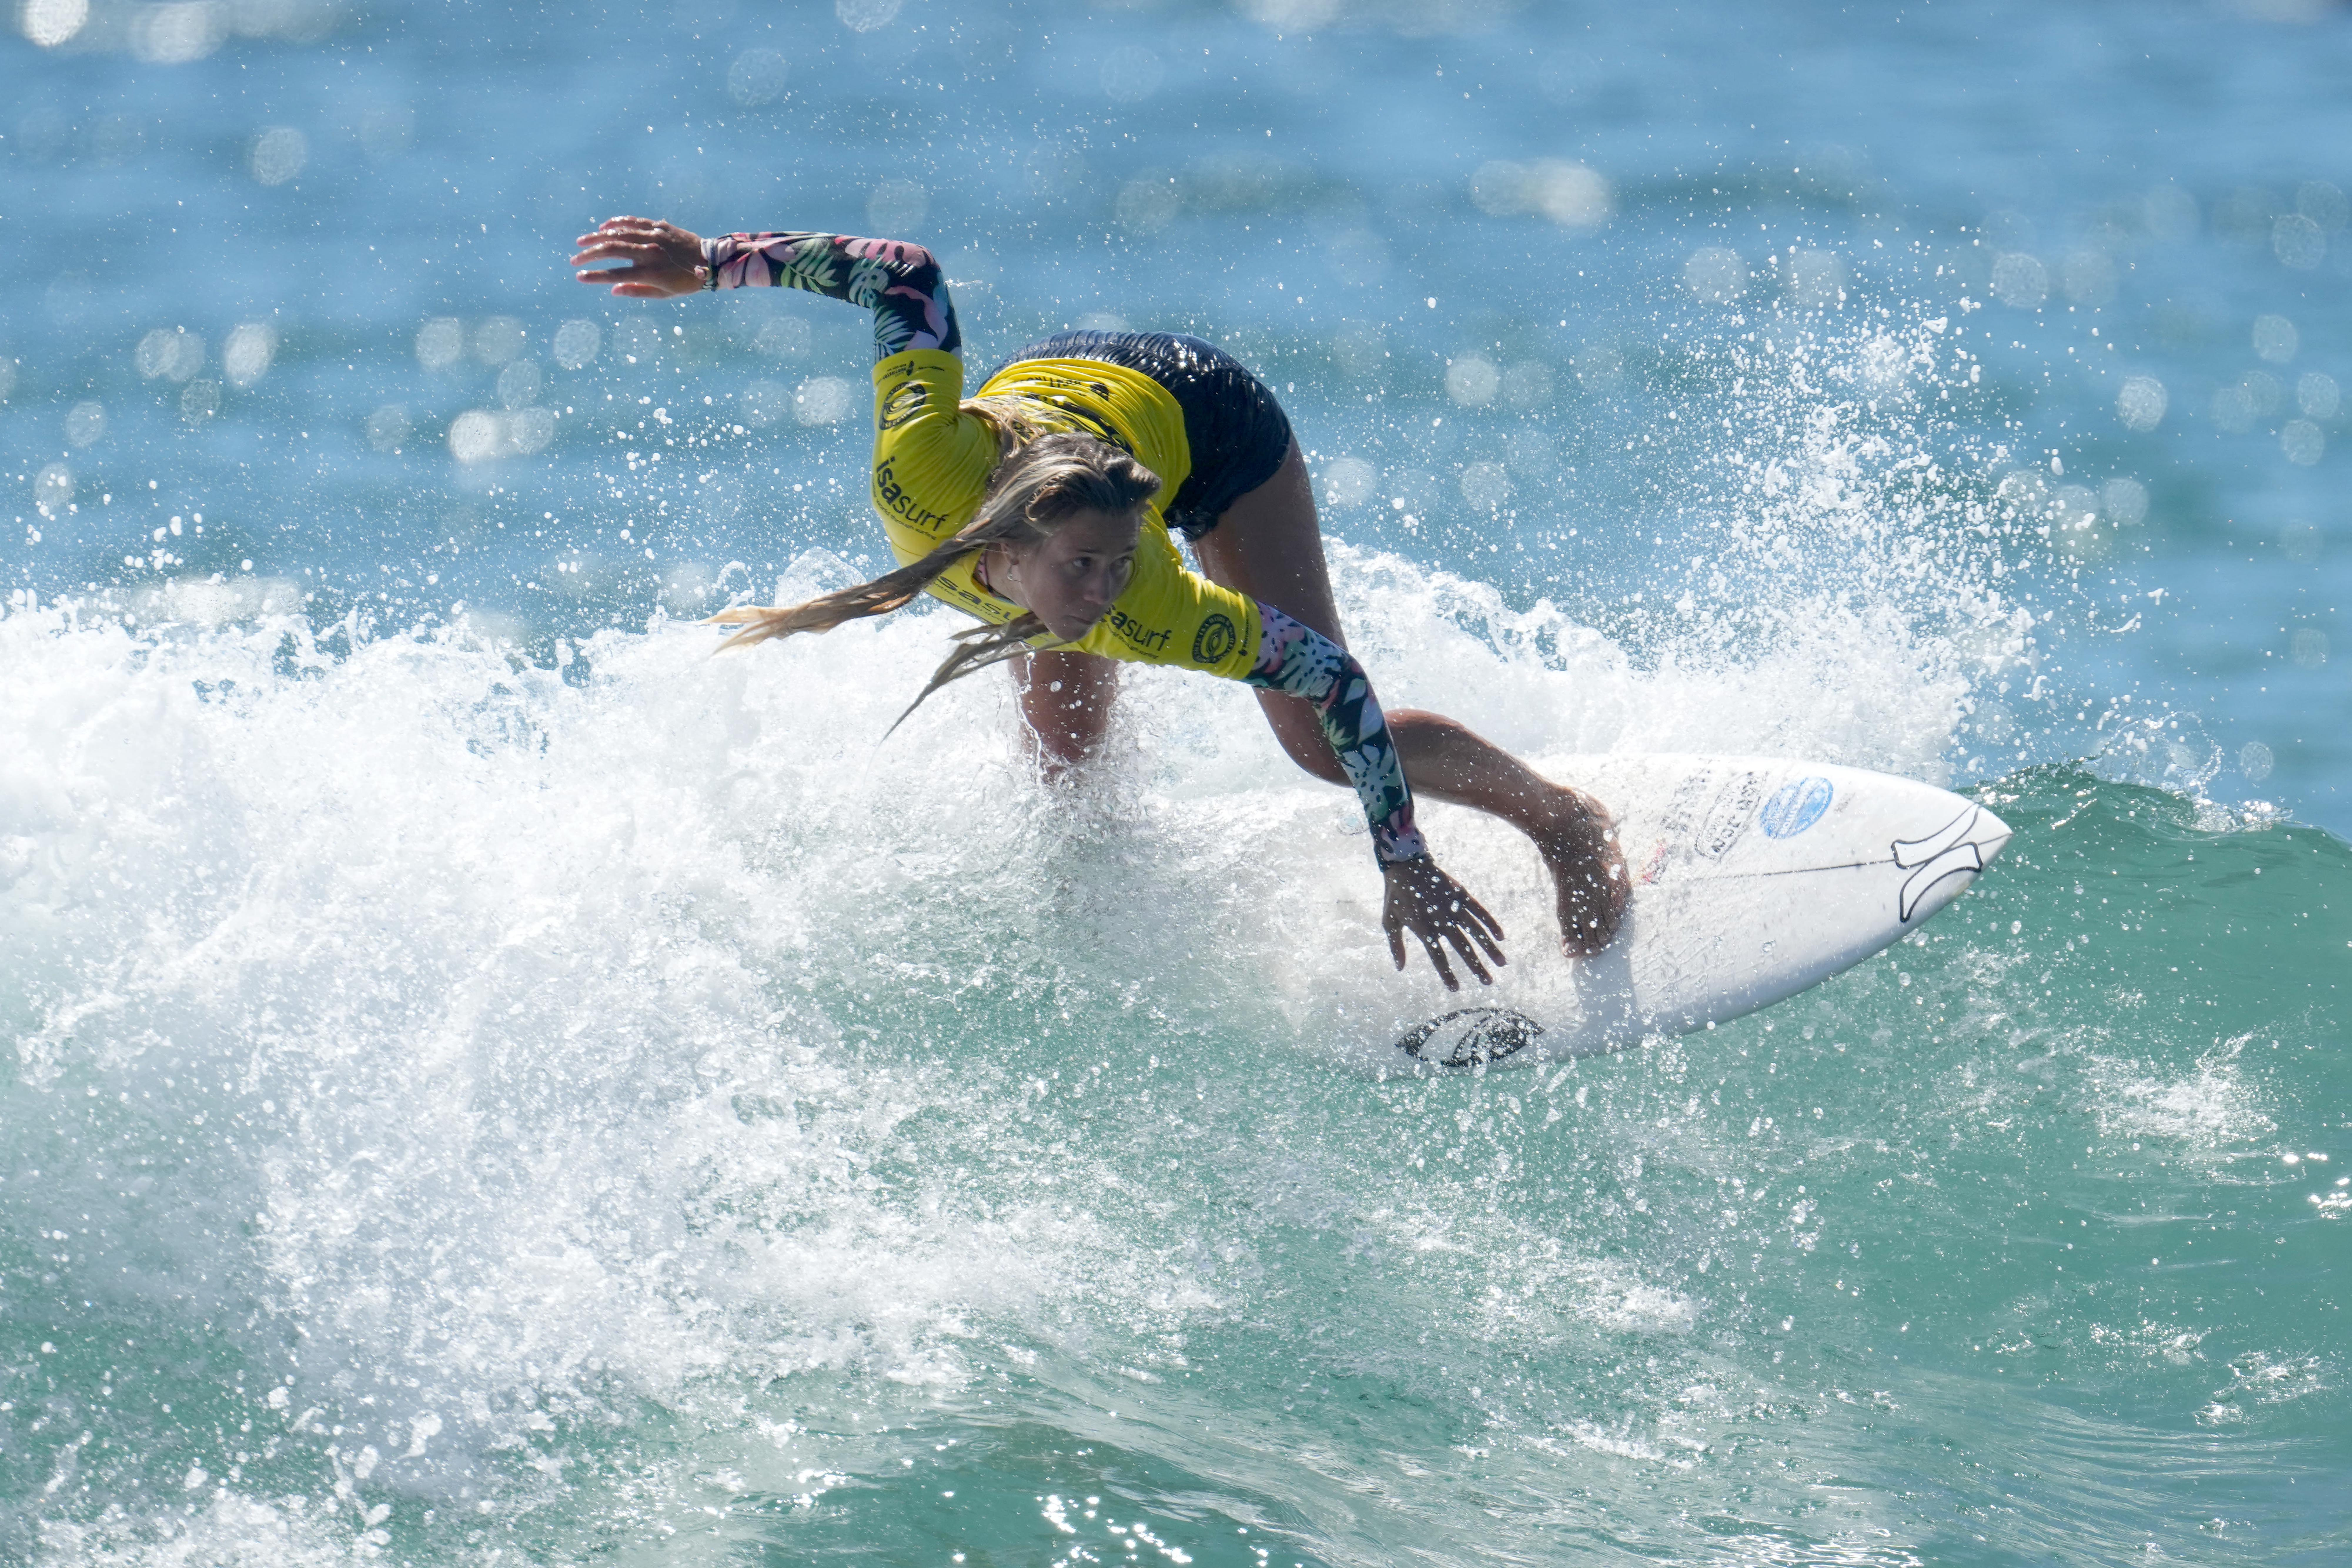 Sep 23, 2022; Huntington Beach, California, USA; Rachel Presti (GER) competes in the Aloha Cup at the ISA World Surfing Games. Mandatory Credit: Kirby Lee-USA TODAY Sports